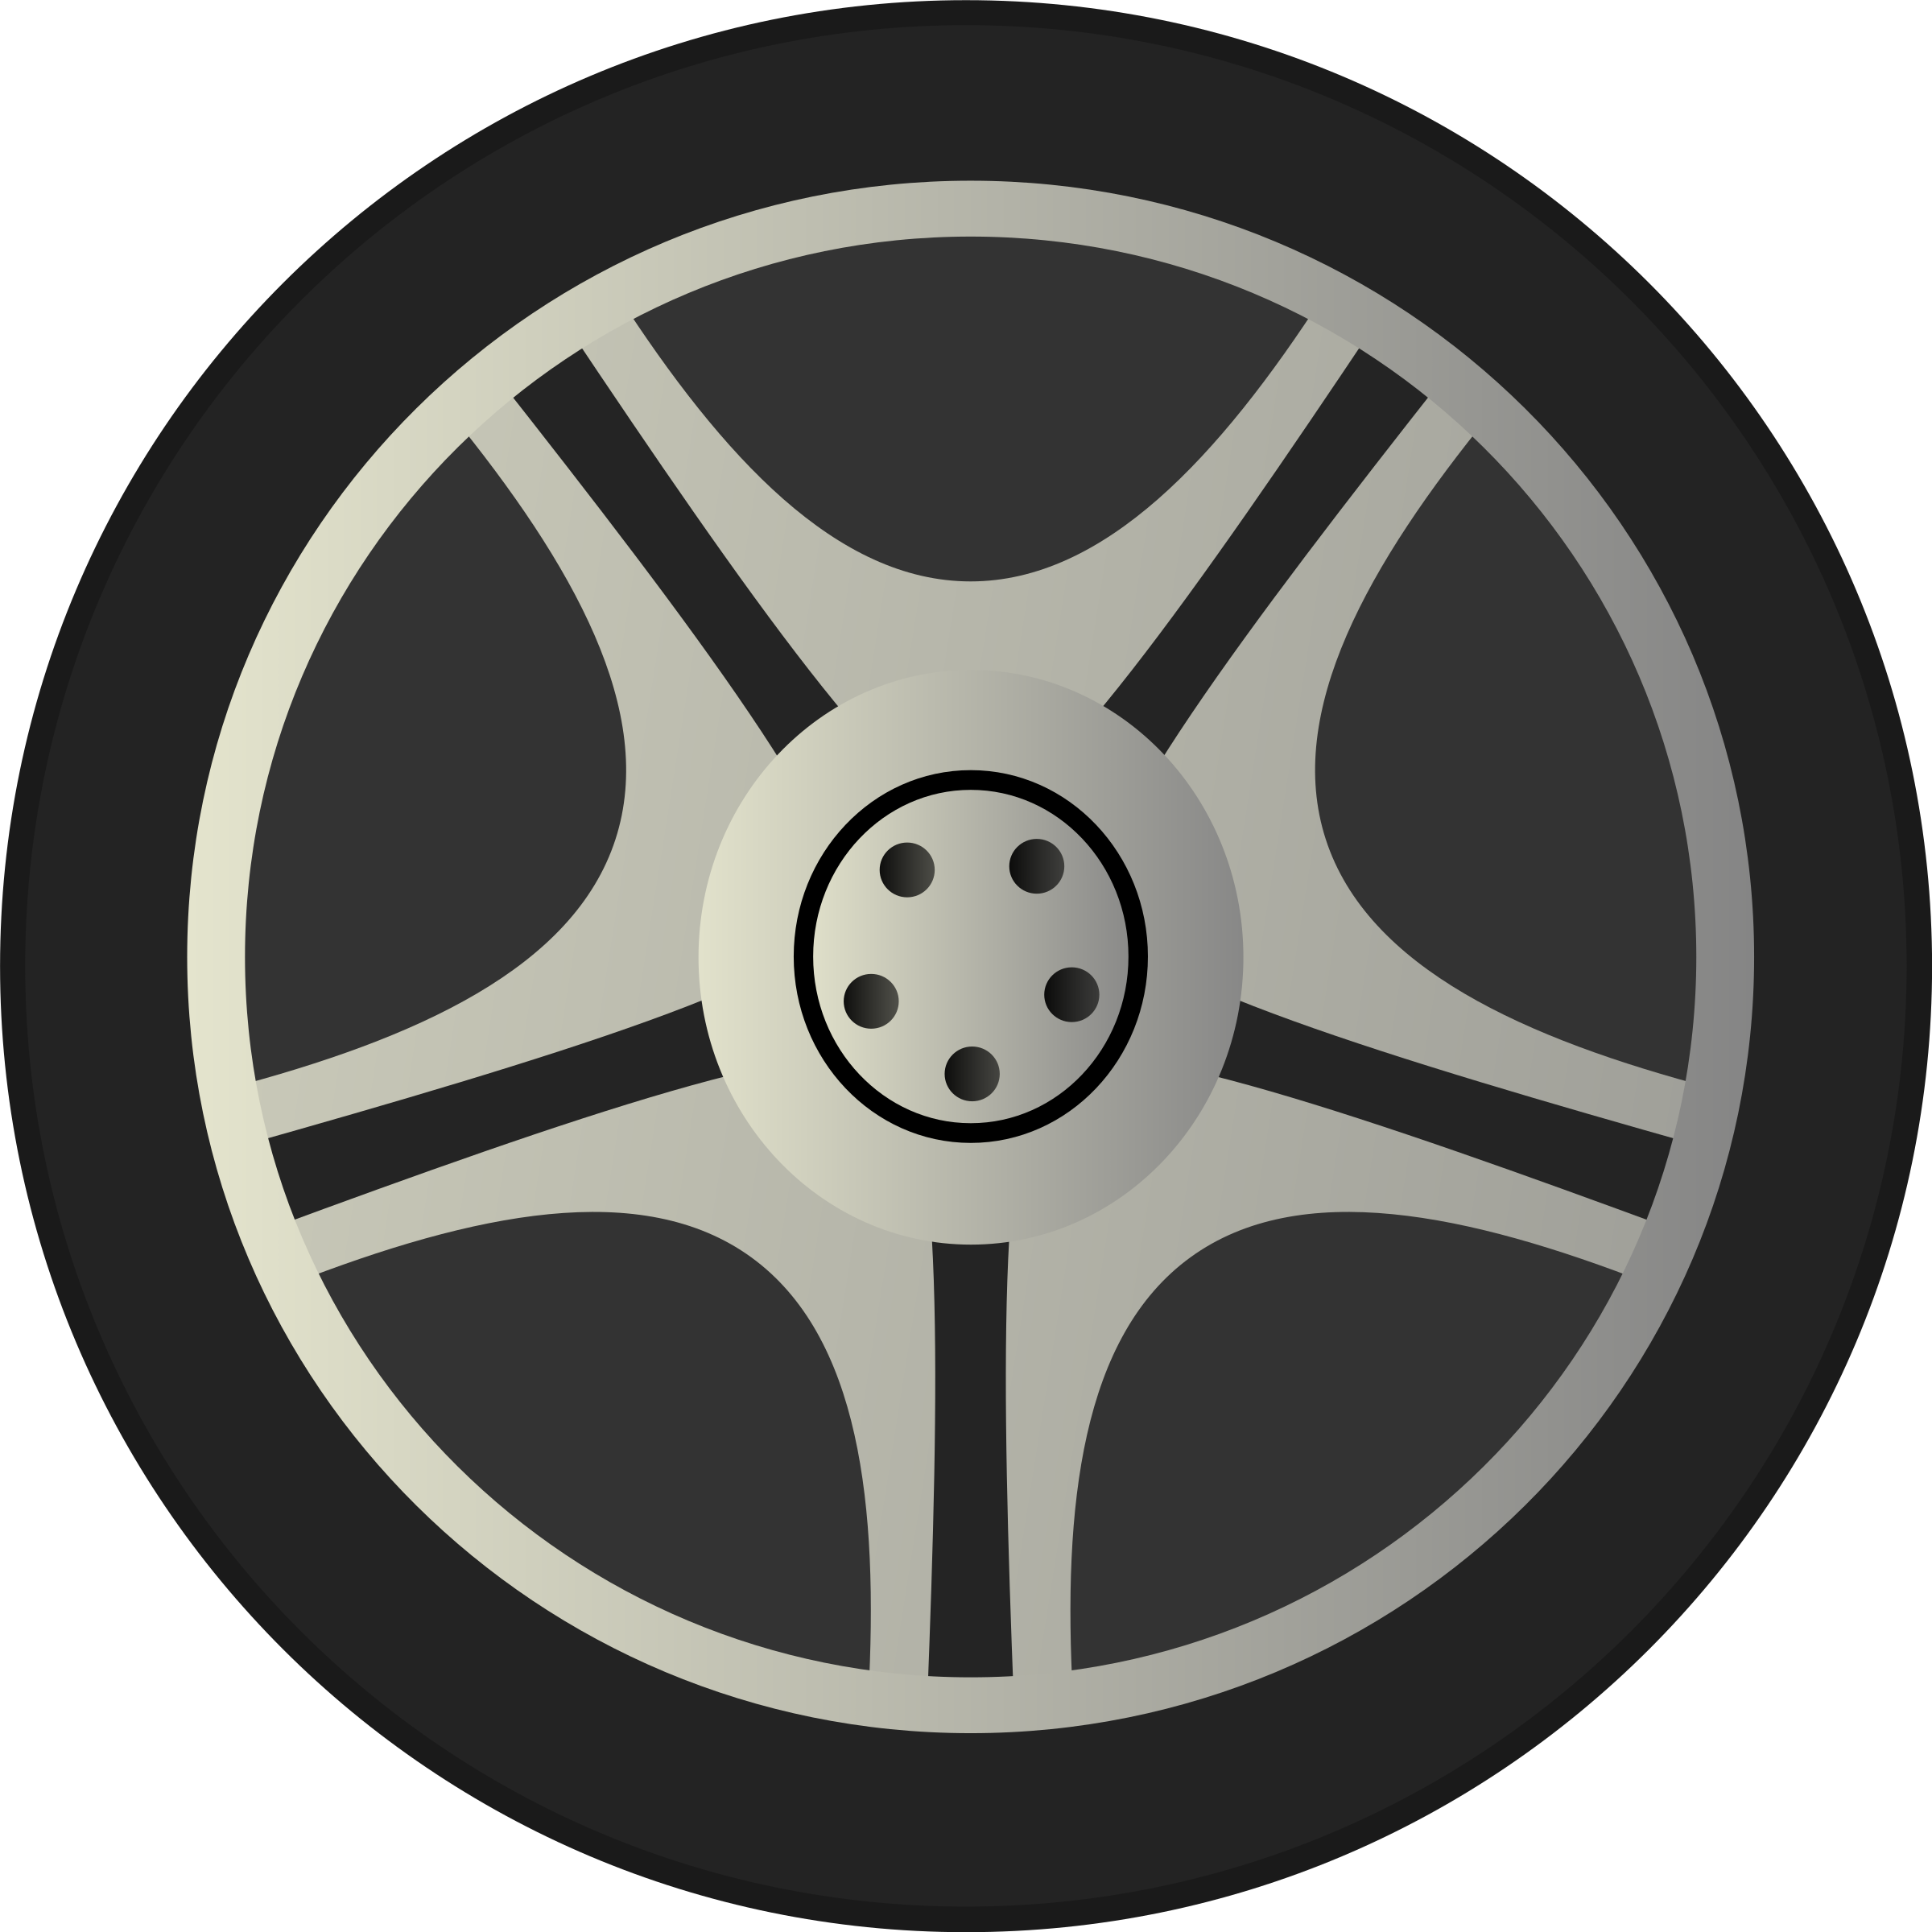 Two car tires clipart